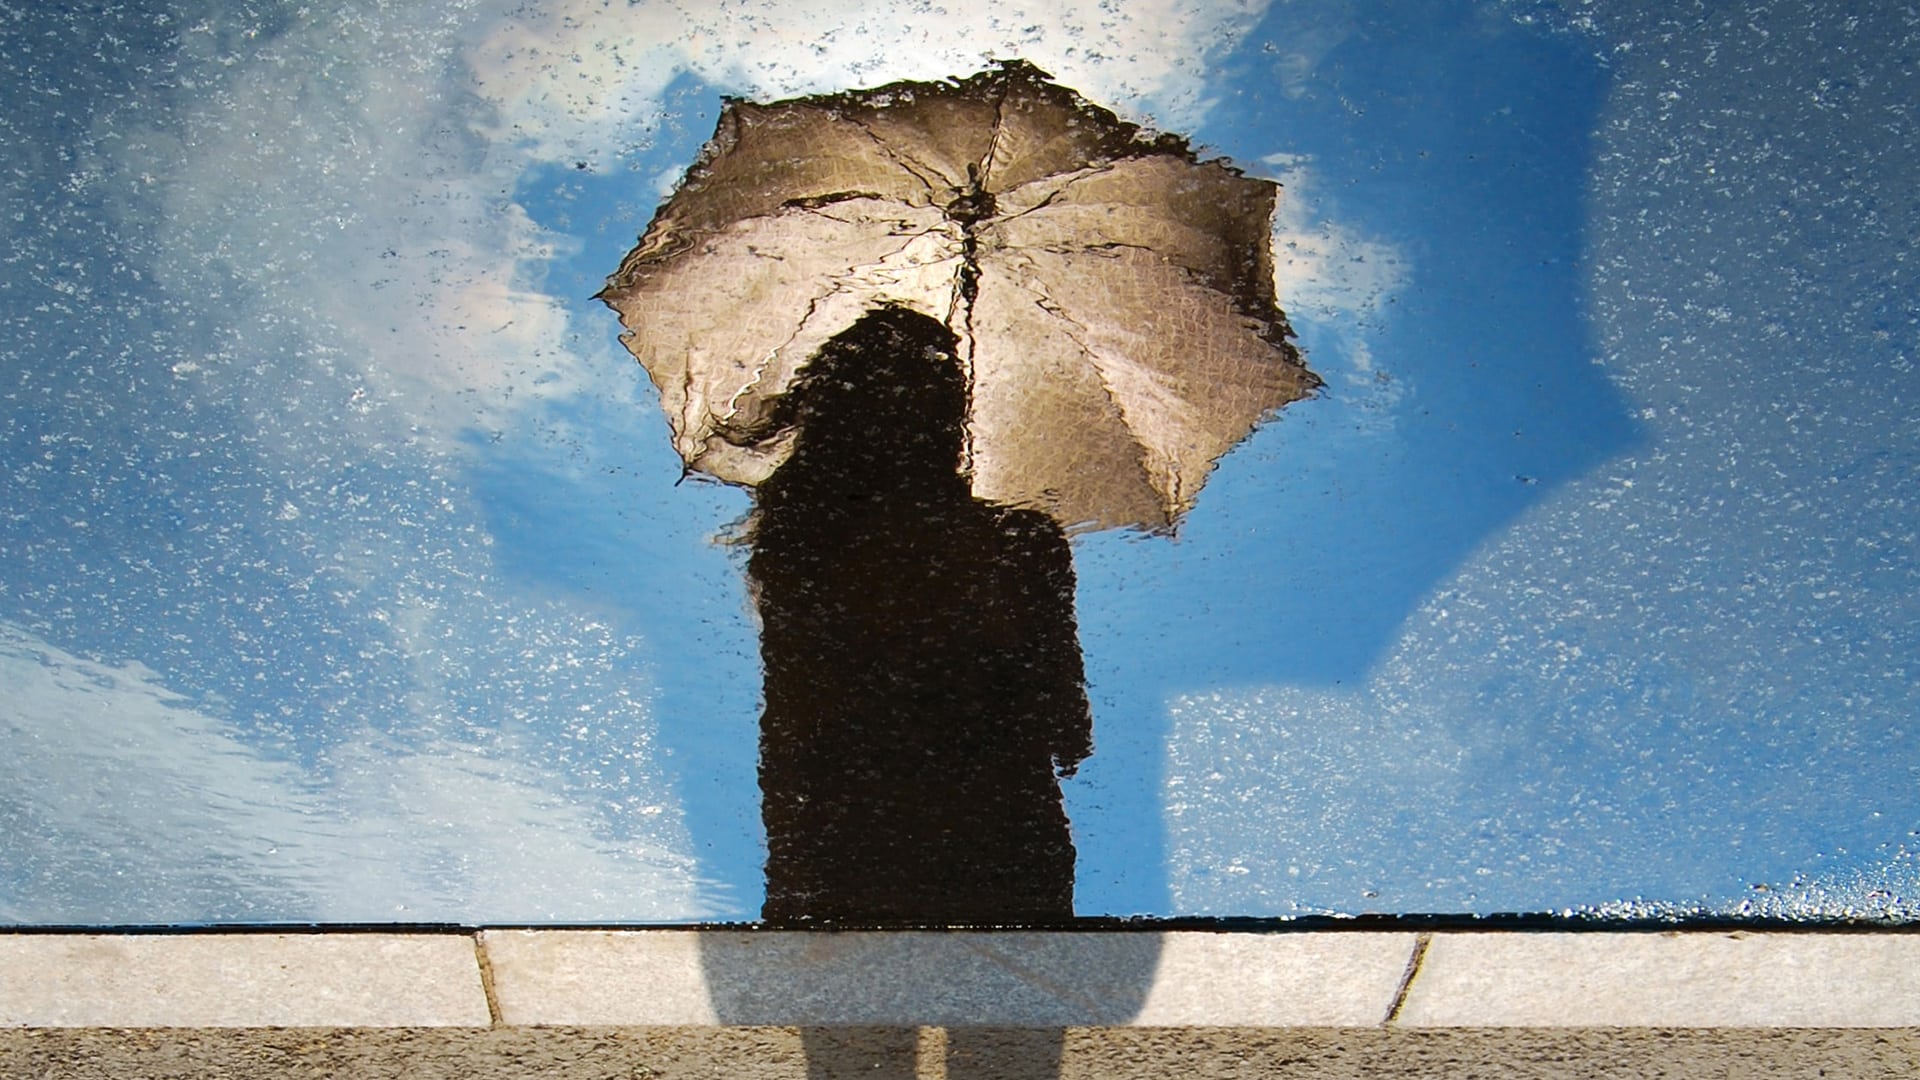 reflection in puddle of woman holding umbrella